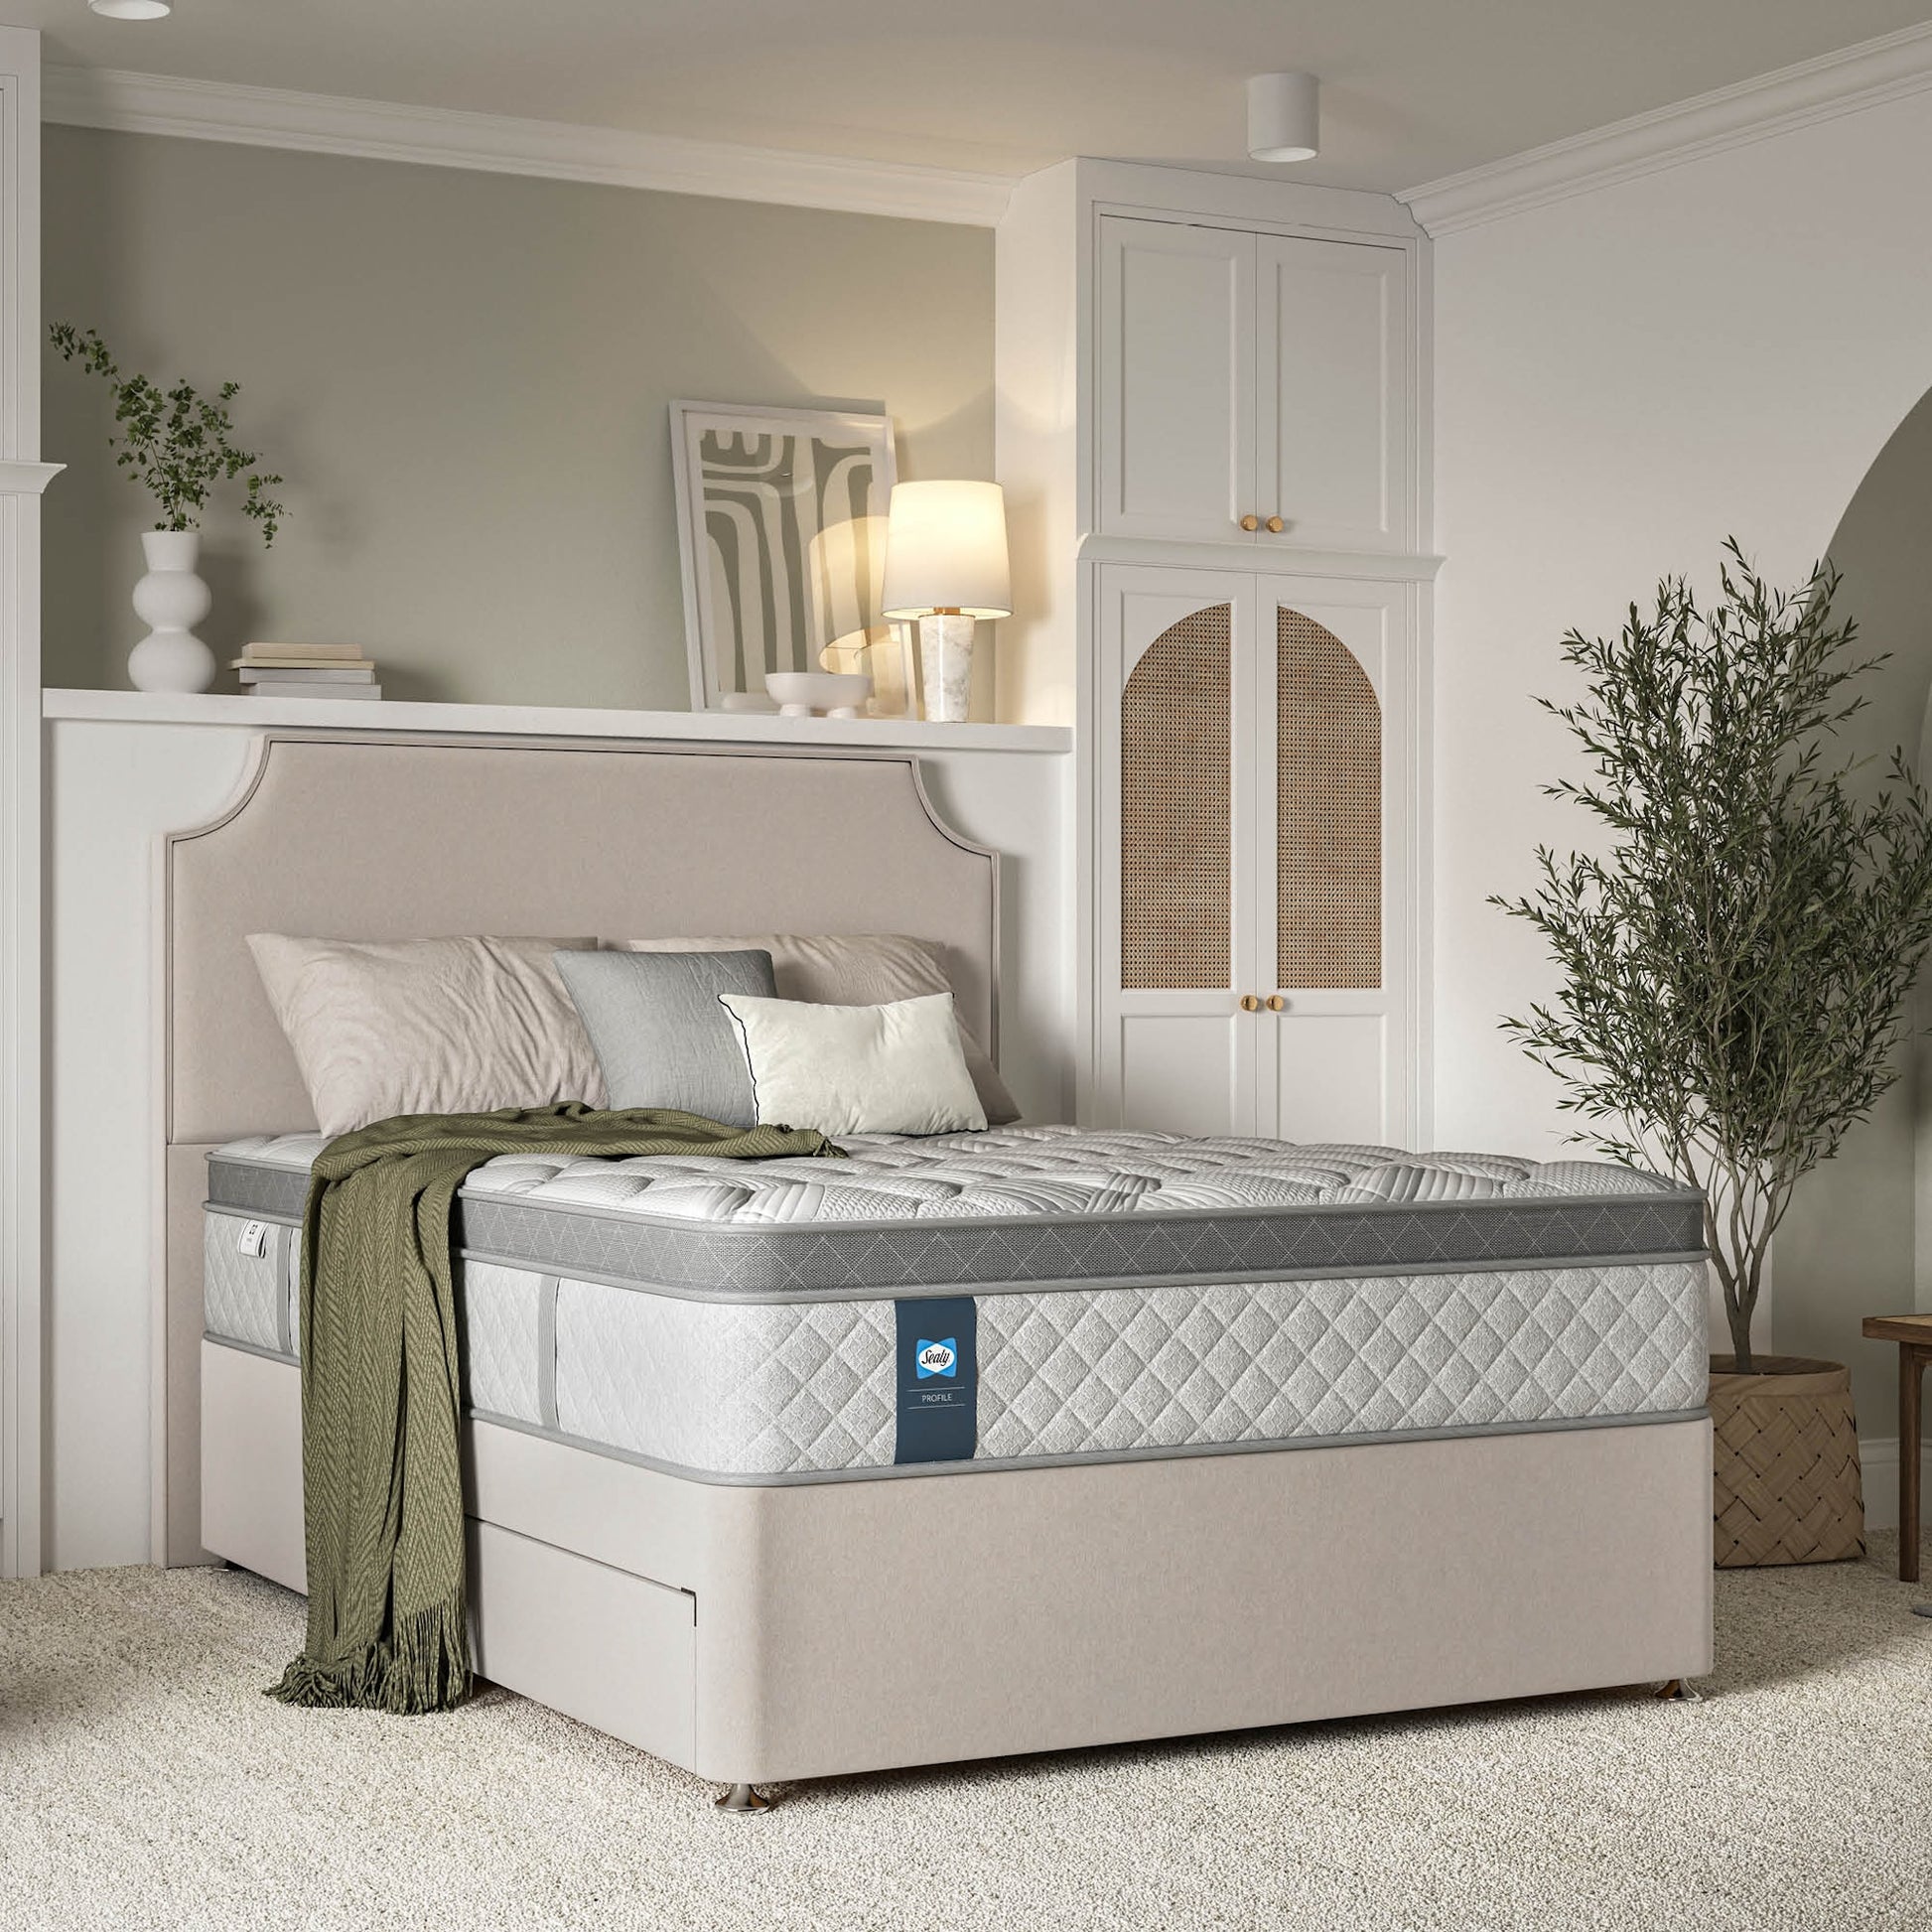 Sealy Trailblazer Geltex PostureTech Mattress - Profile Collection by Sealy in only at TV Beds Northwest